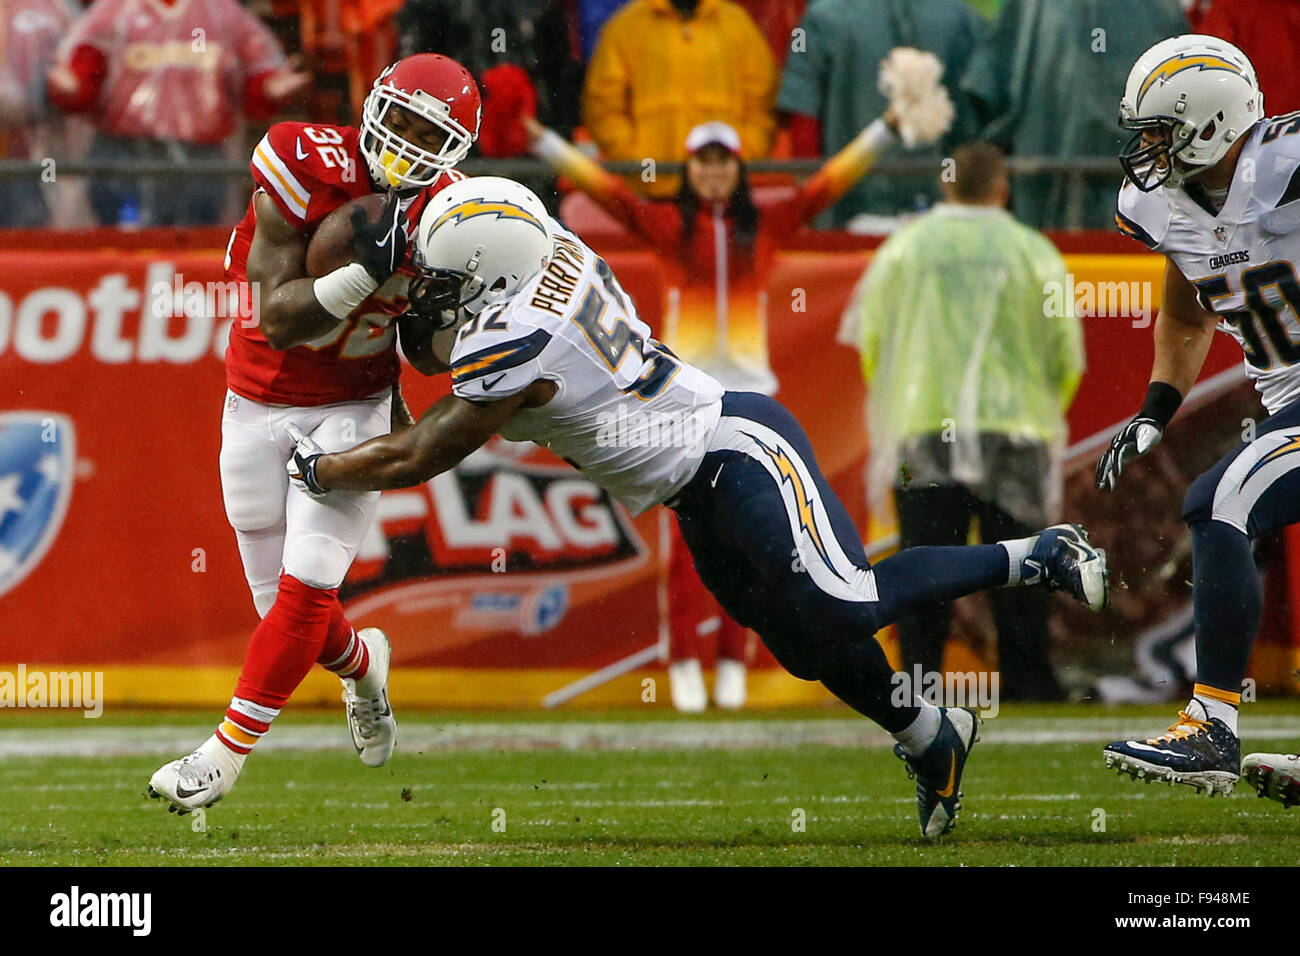 December 13, 2015: Kansas City Chiefs running back Spencer Ware (32) breaks a tackle by San Diego Chargers inside linebacker Denzel Perryman (52) during the NFL game between the San Diego Chargers and the Kansas City Chiefs at Arrowhead Stadium in Kansas City, MO Tim Warner/CSM. Stock Photo